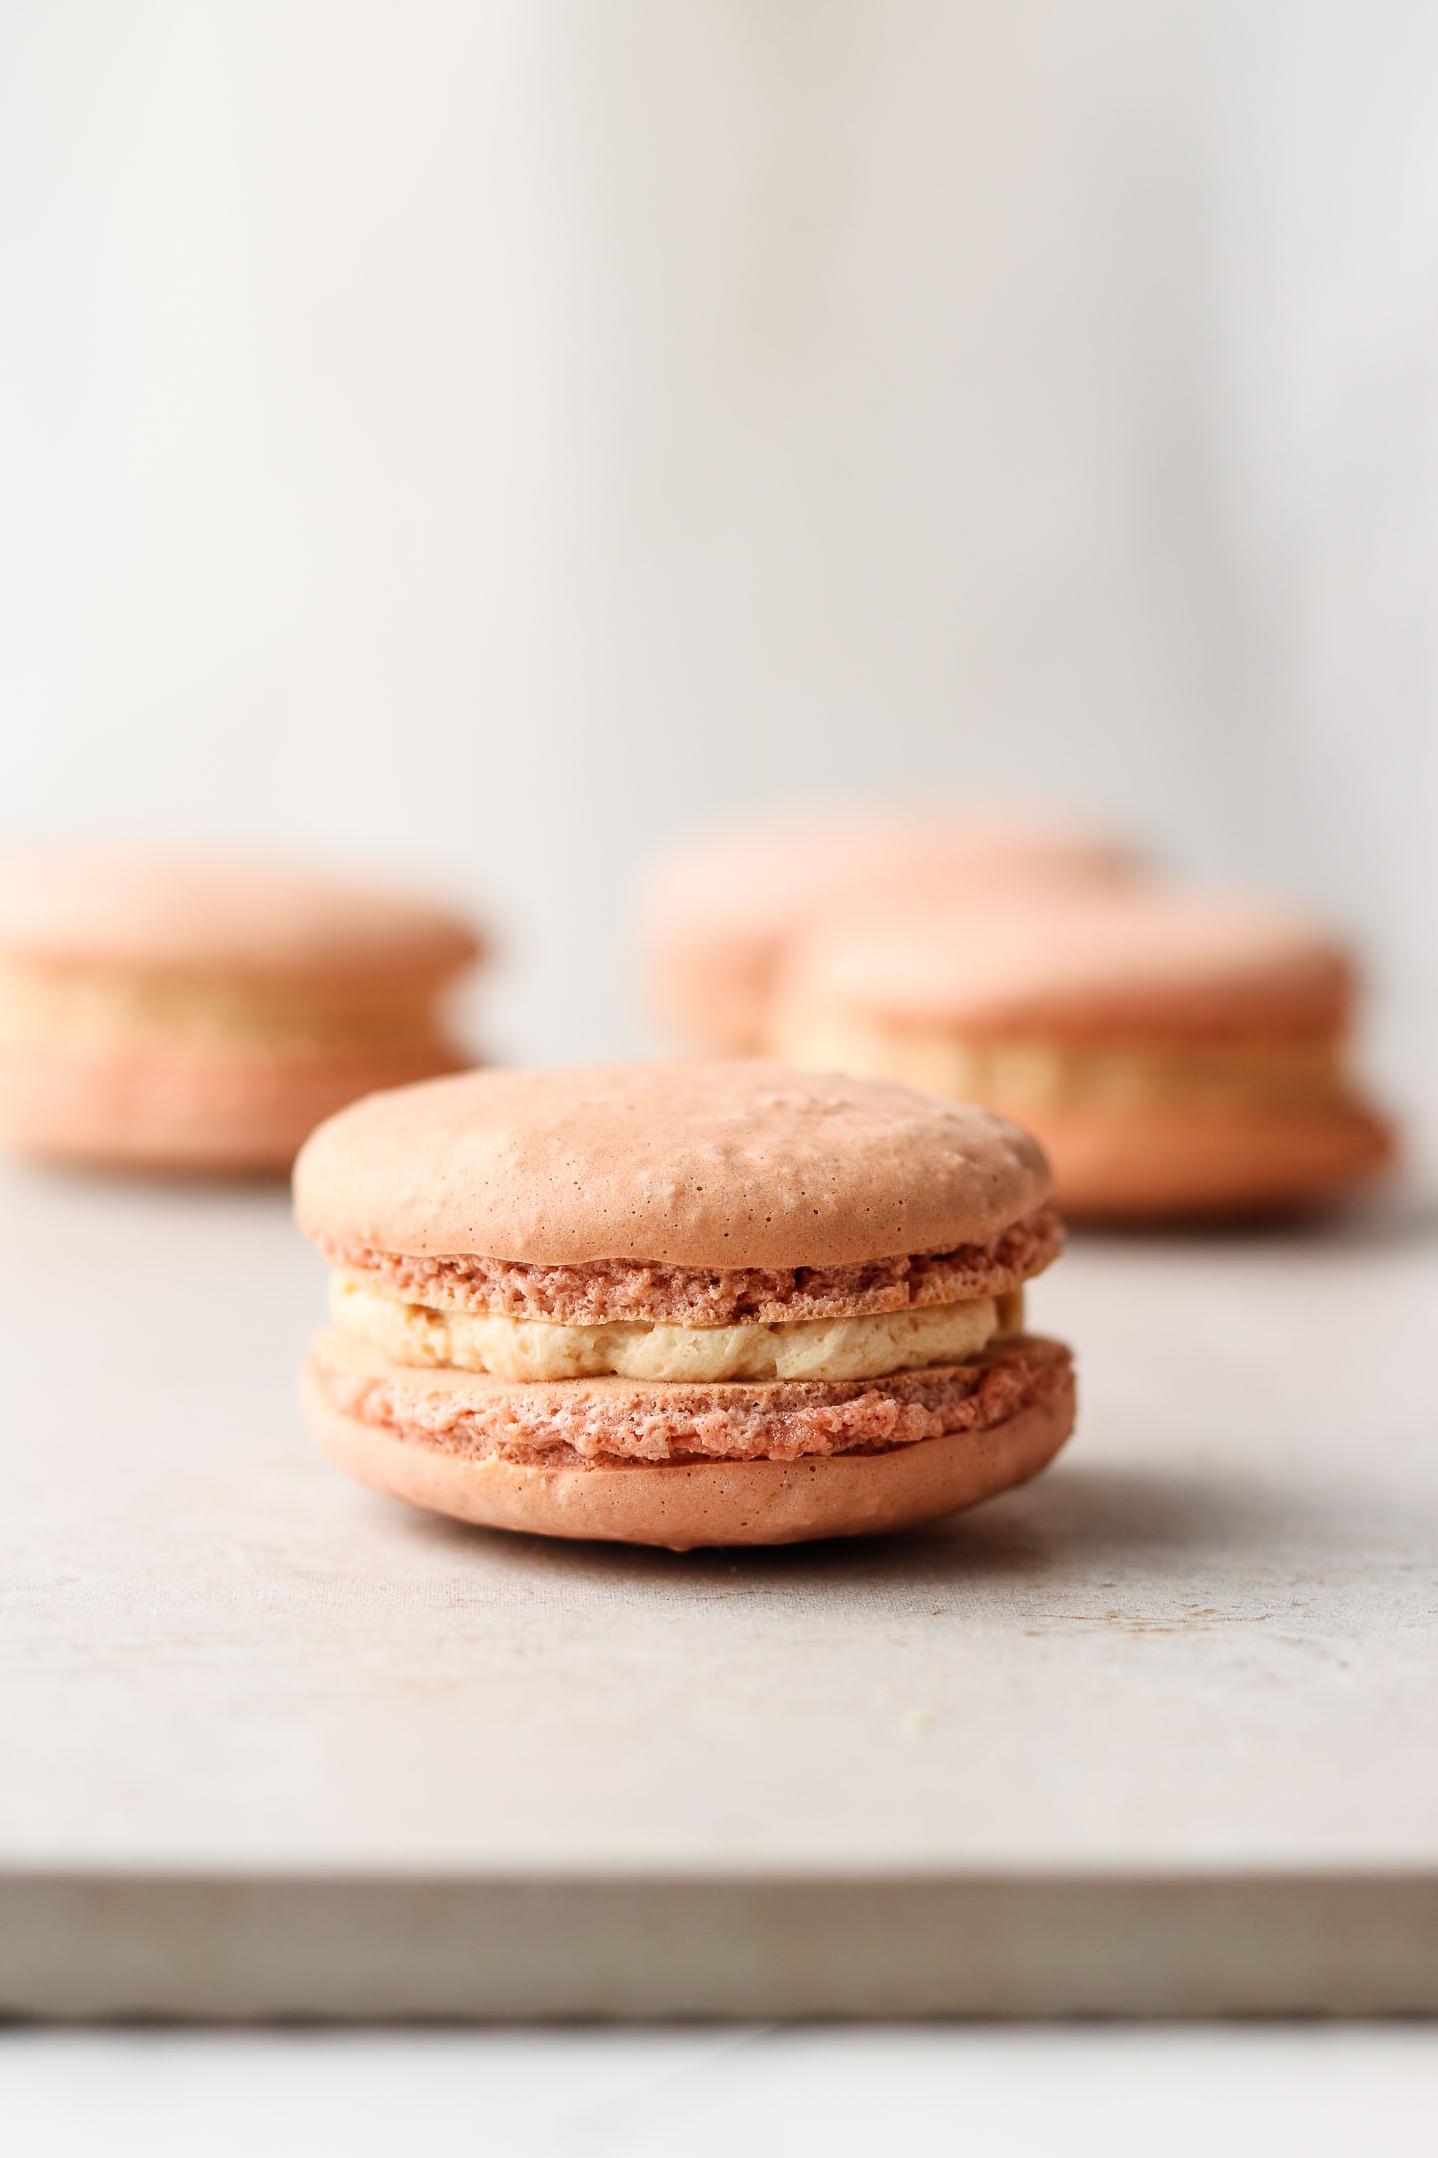  You won't believe how simple and easy it is to make vegan macaroons at home.